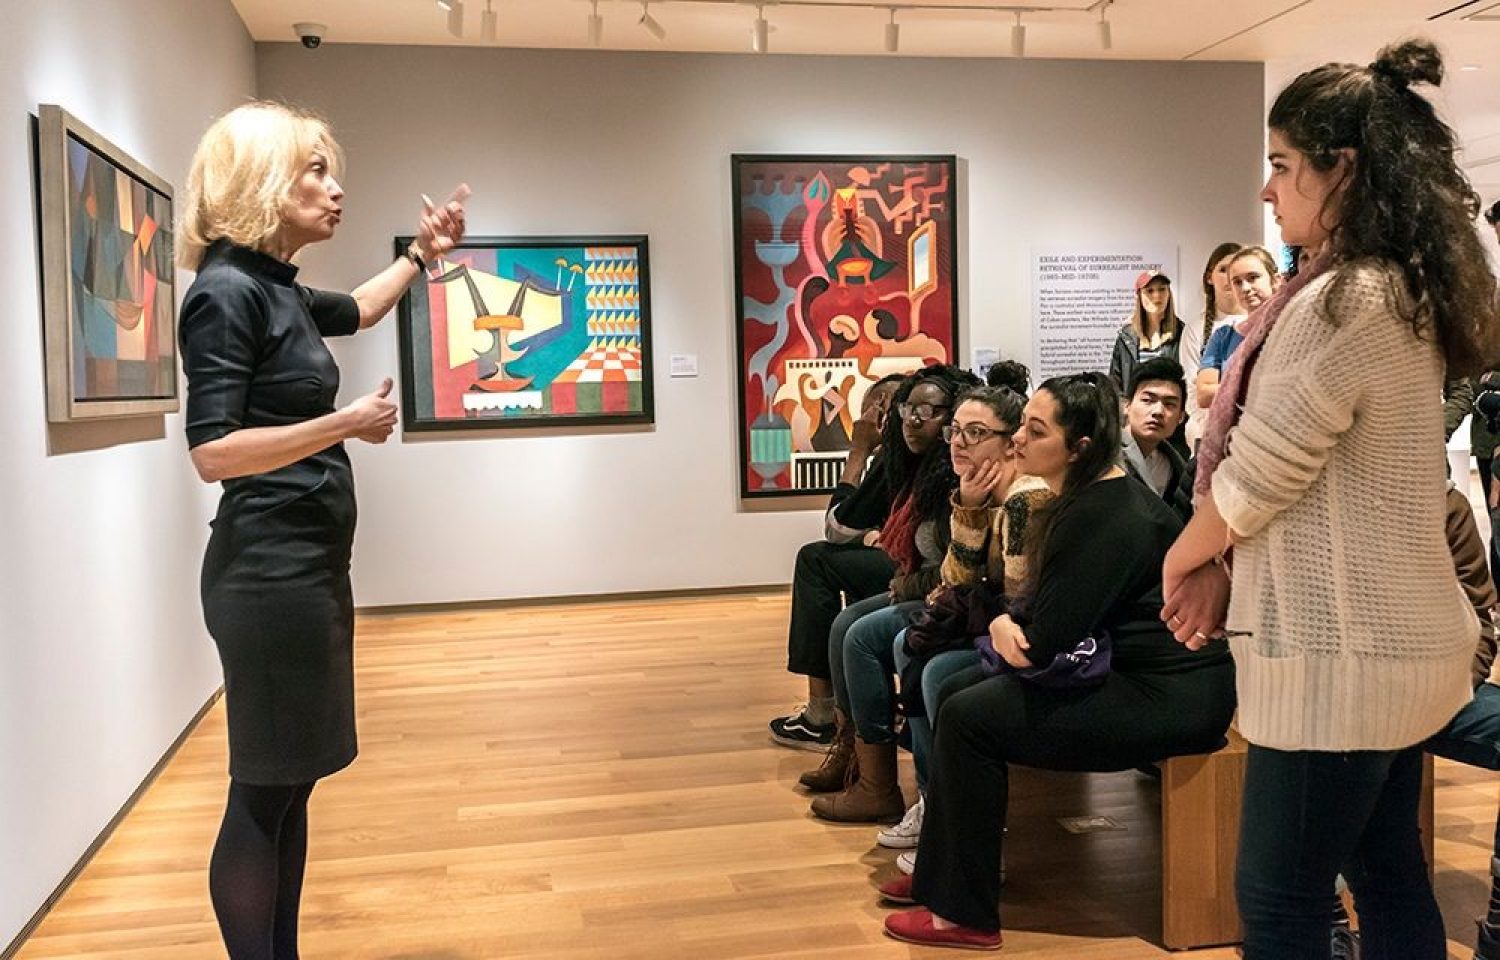 A lecturer speaking at the McMullen Museum of Art